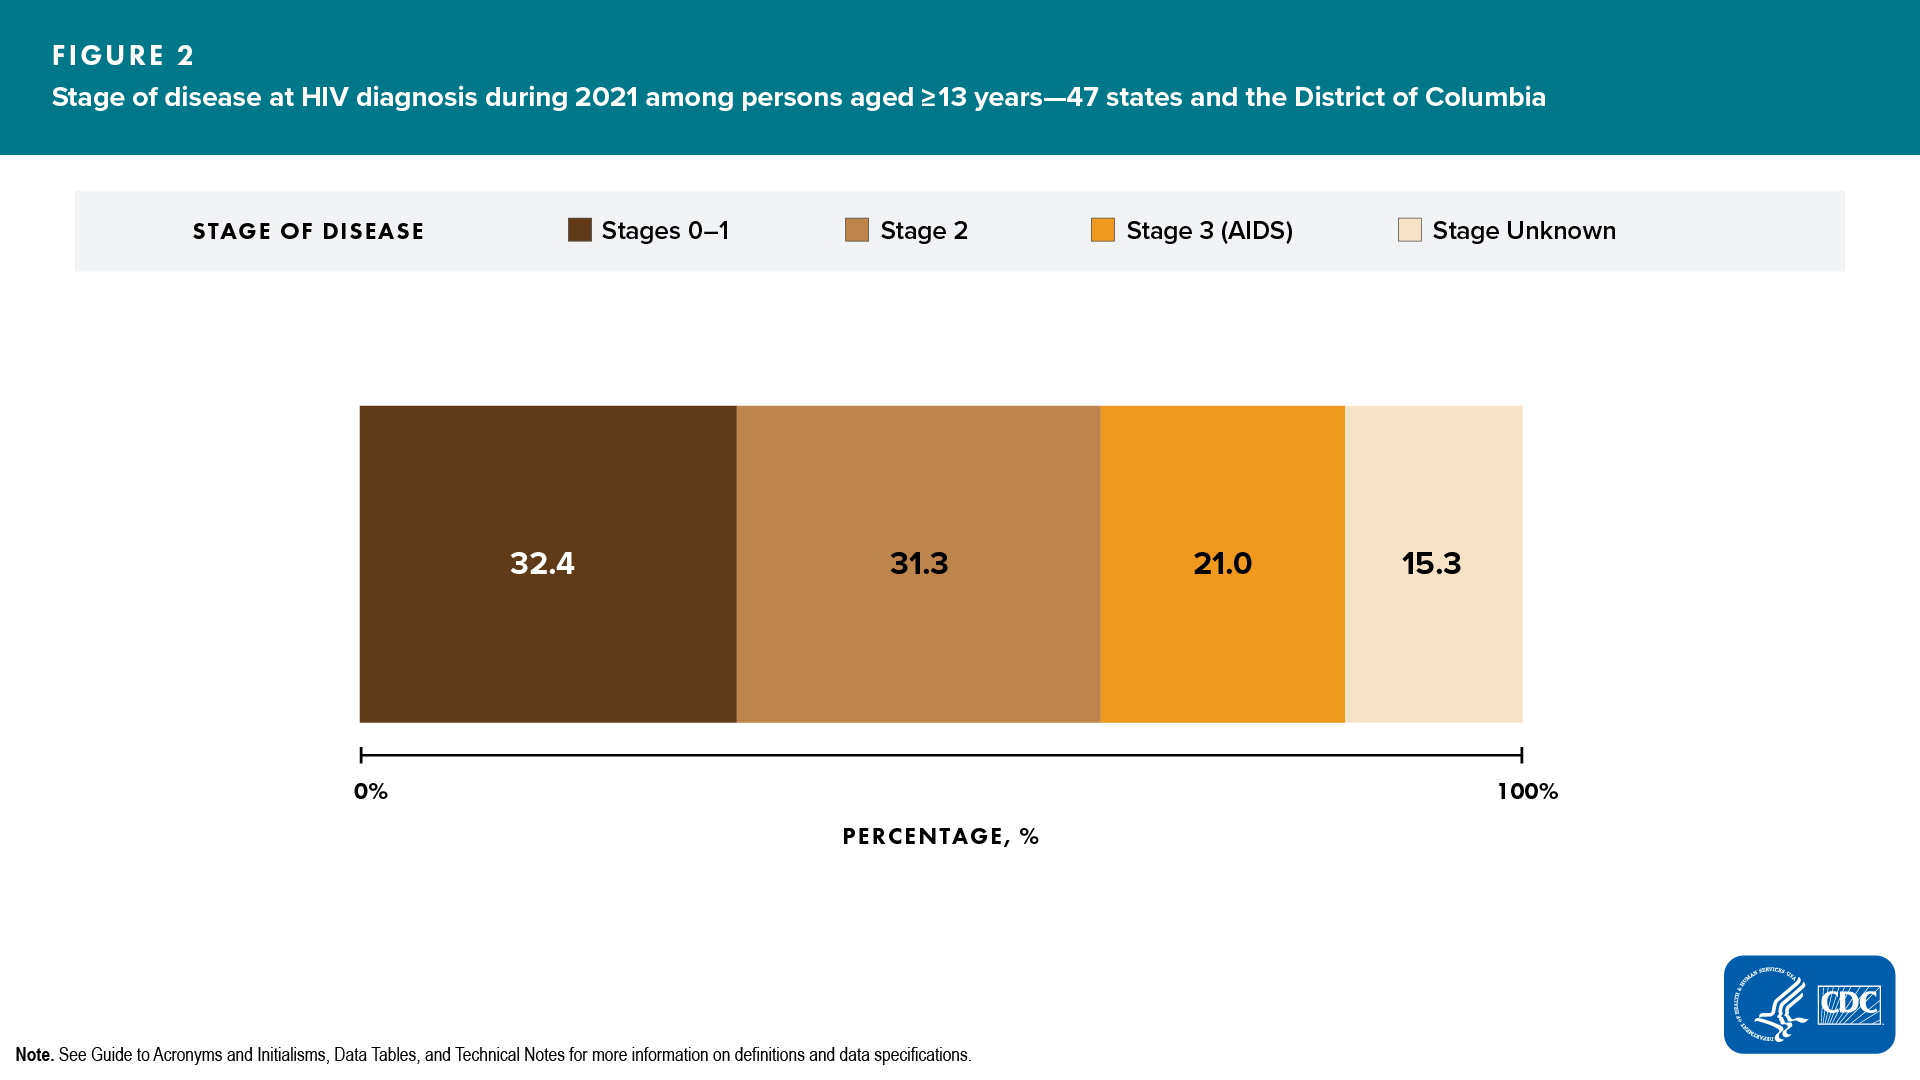 Figure 2. Stage of disease at HIV diagnosis during 2021 among persons aged ≥13 years — 47 states and the District of Columbia